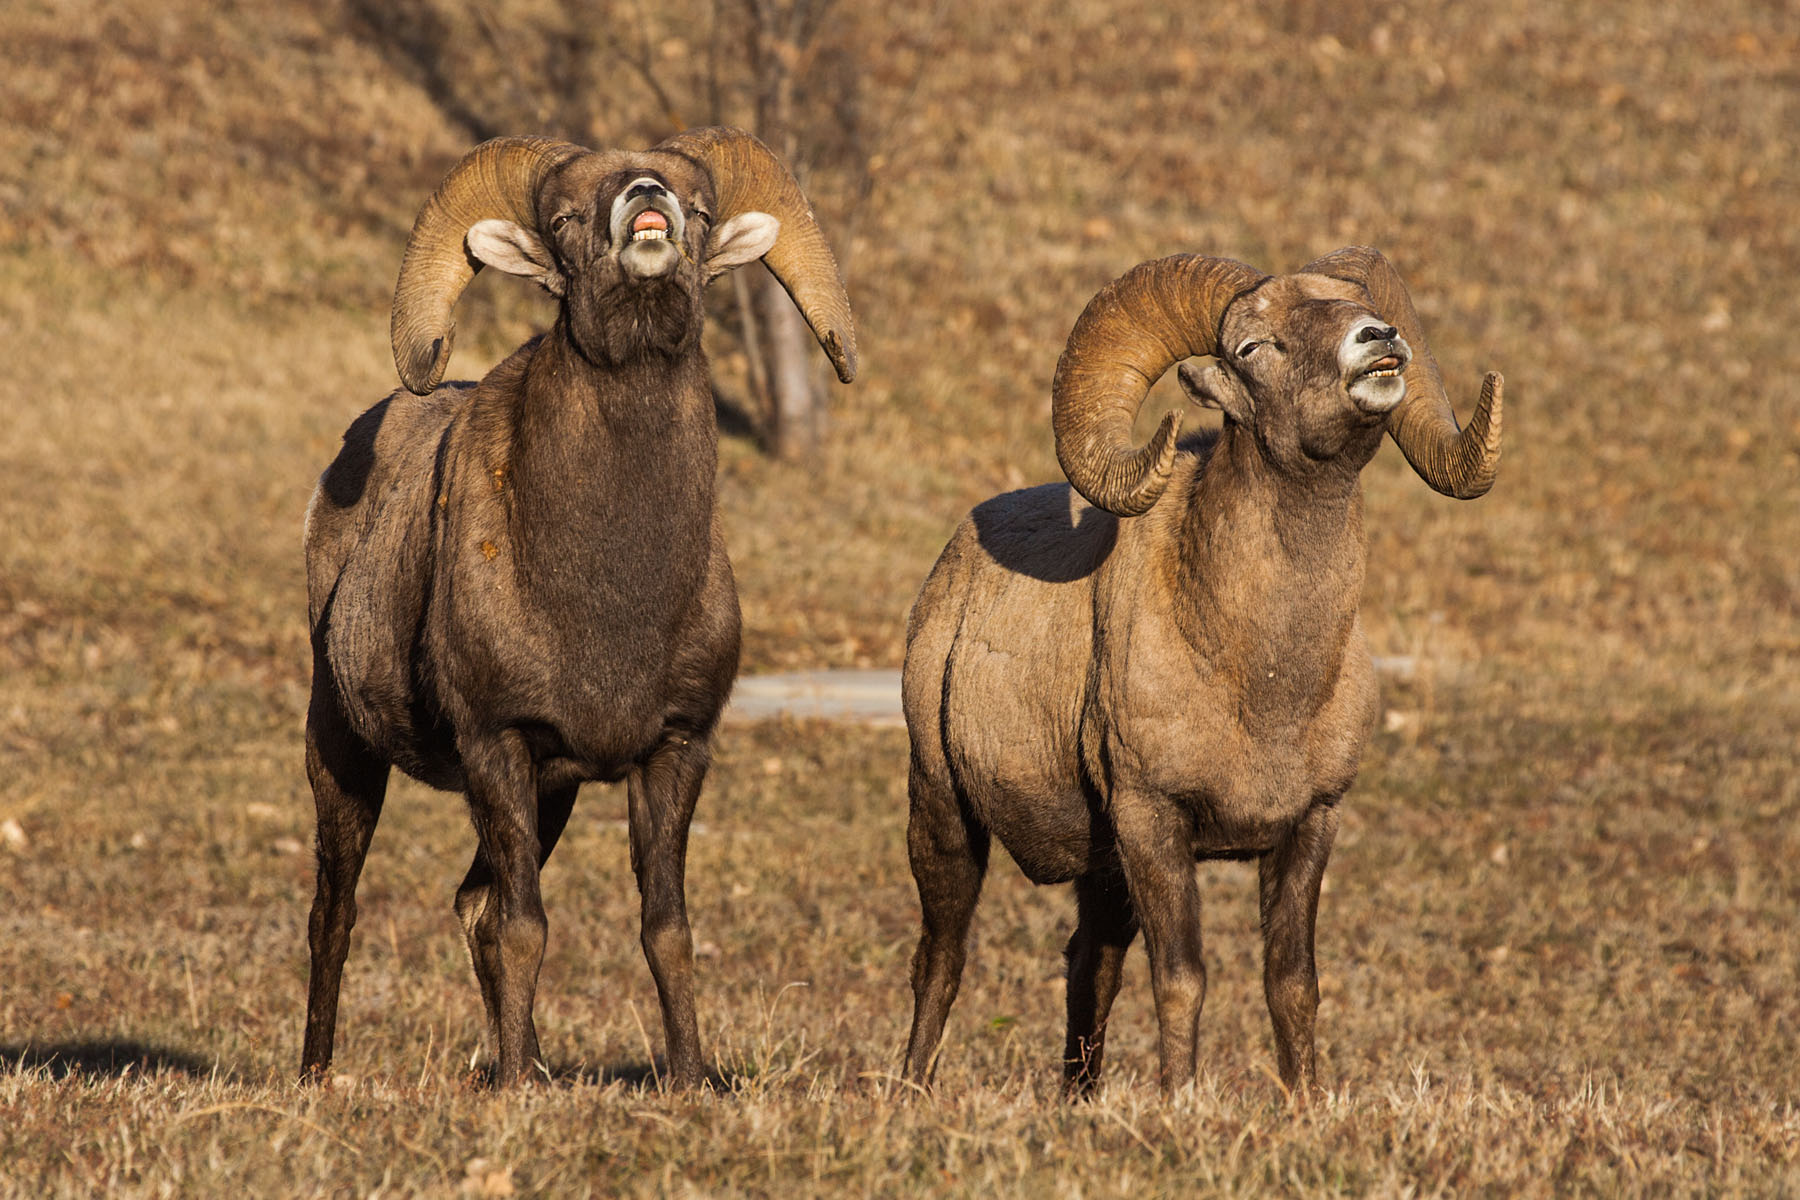 Rocky Mountain Bighorns rams showing mating behavior, Cleghorn State Fish Hatchery, SD.  Click for next photo.